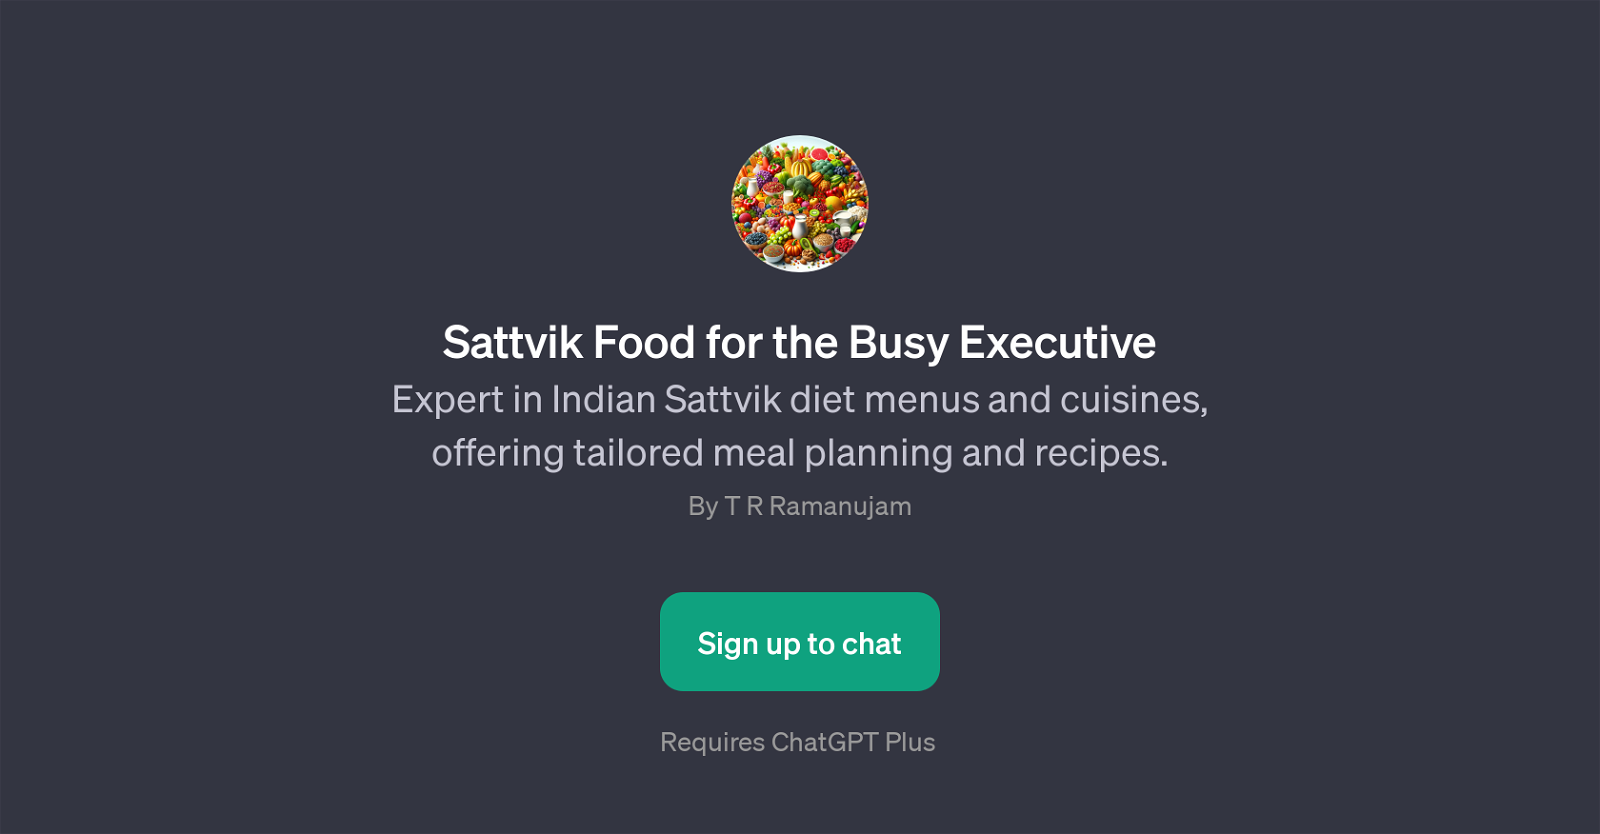 Sattvik Food for the Busy Executive website